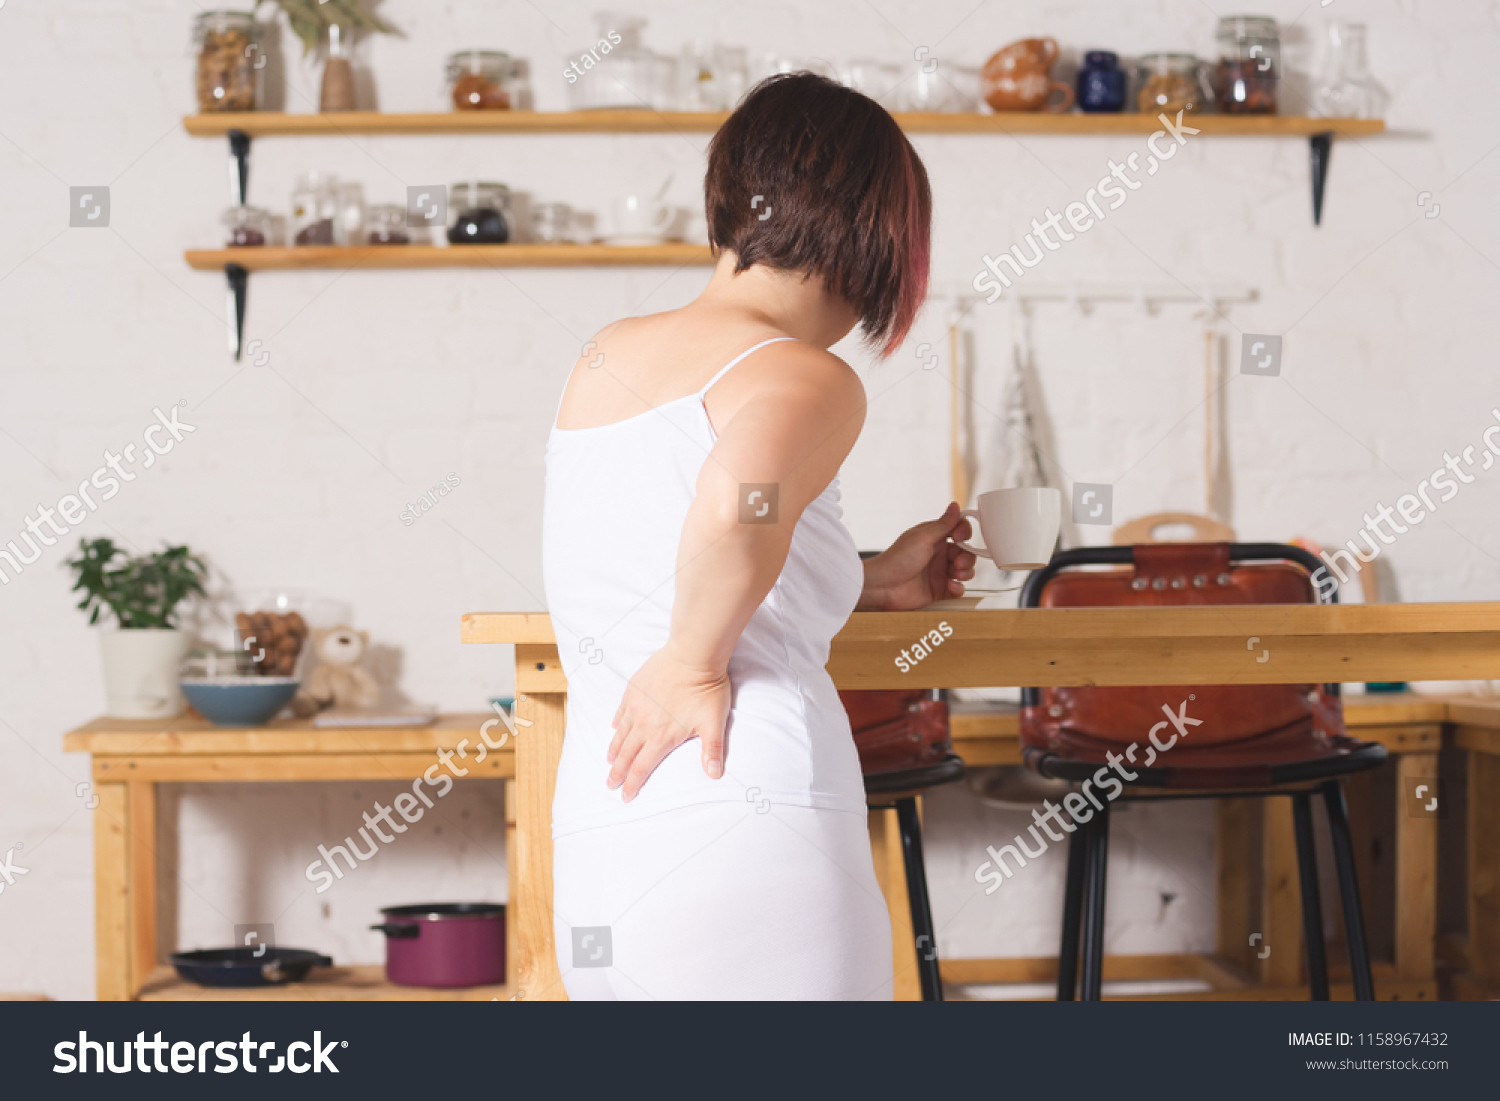 Back Pain Kidney Inflammation Woman Suffering Stock Photo 1158967432